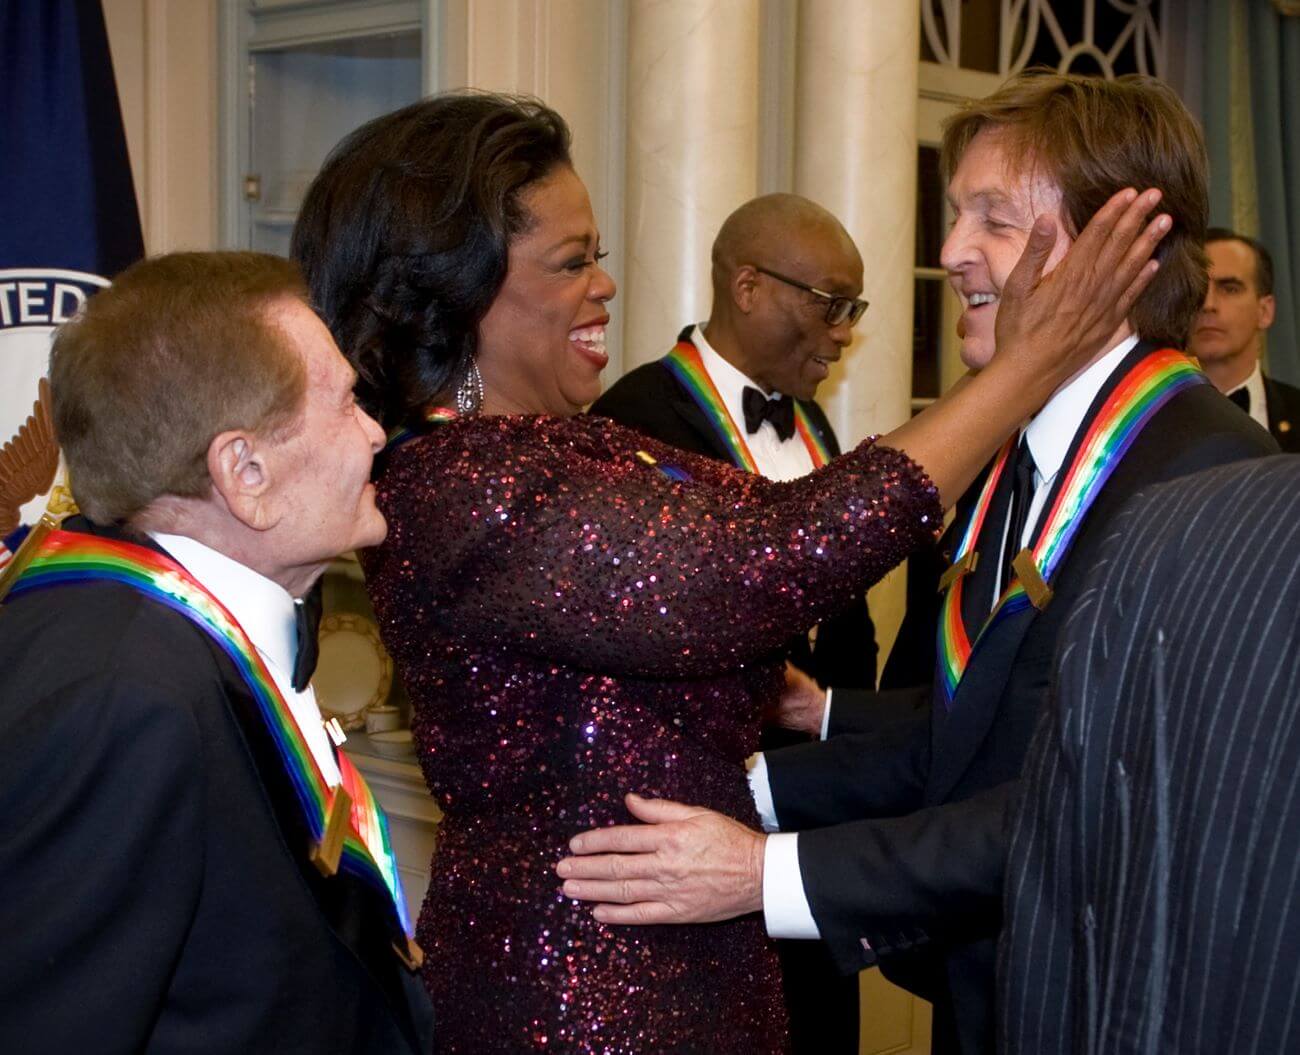 Oprah grasps Paul McCartney's face at the Kennedy Center Honors while fellow honoree Jerry Herman looks on. Bill T. Jones stands behind them.